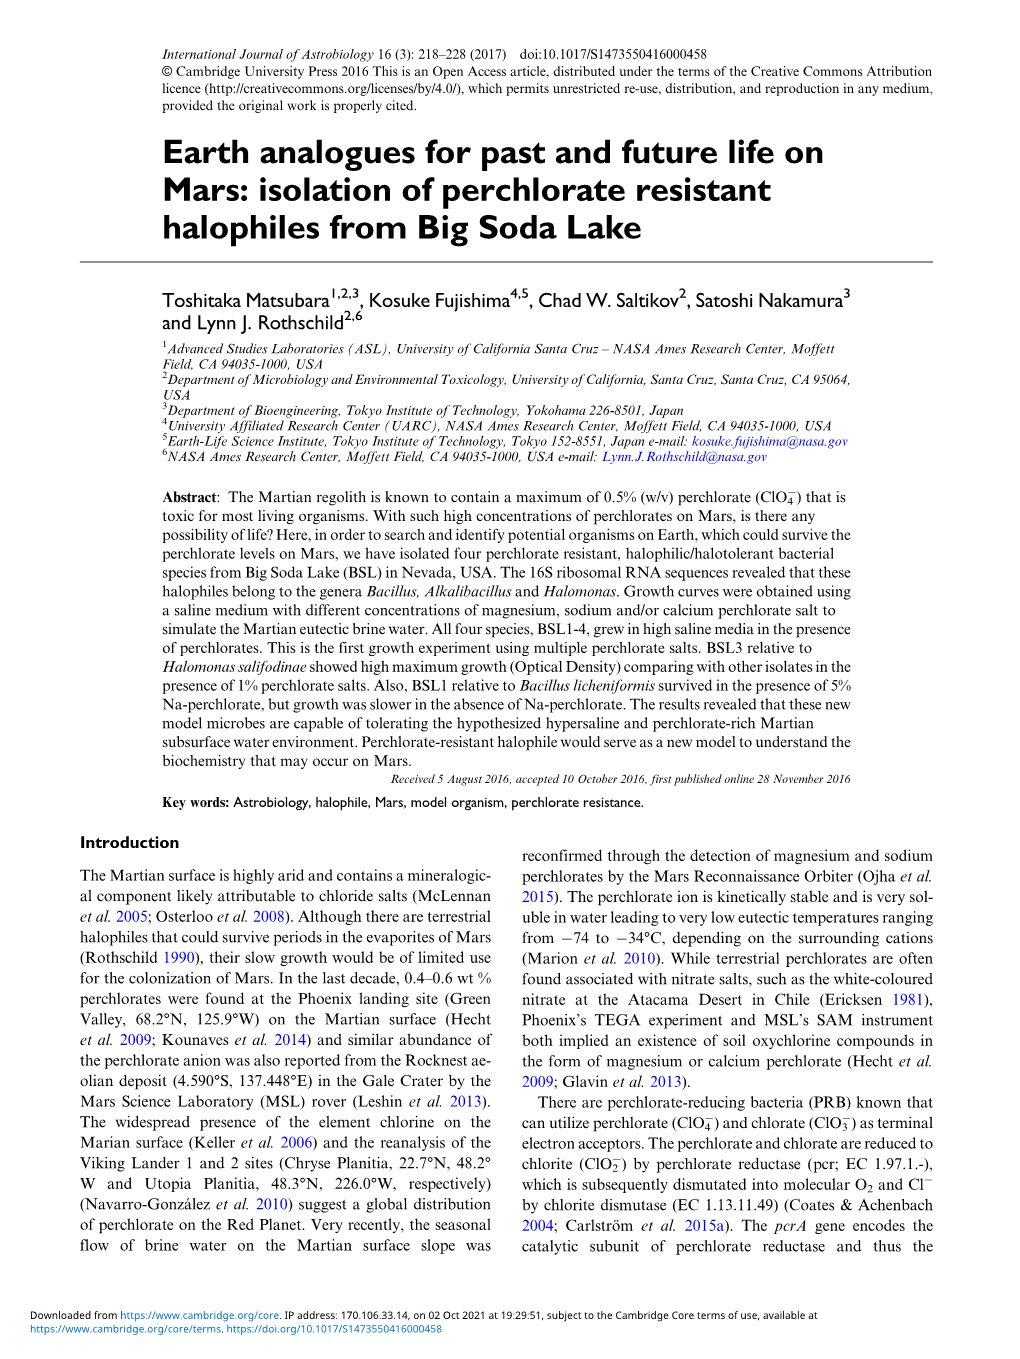 Earth Analogues for Past and Future Life on Mars: Isolation of Perchlorate Resistant Halophiles from Big Soda Lake